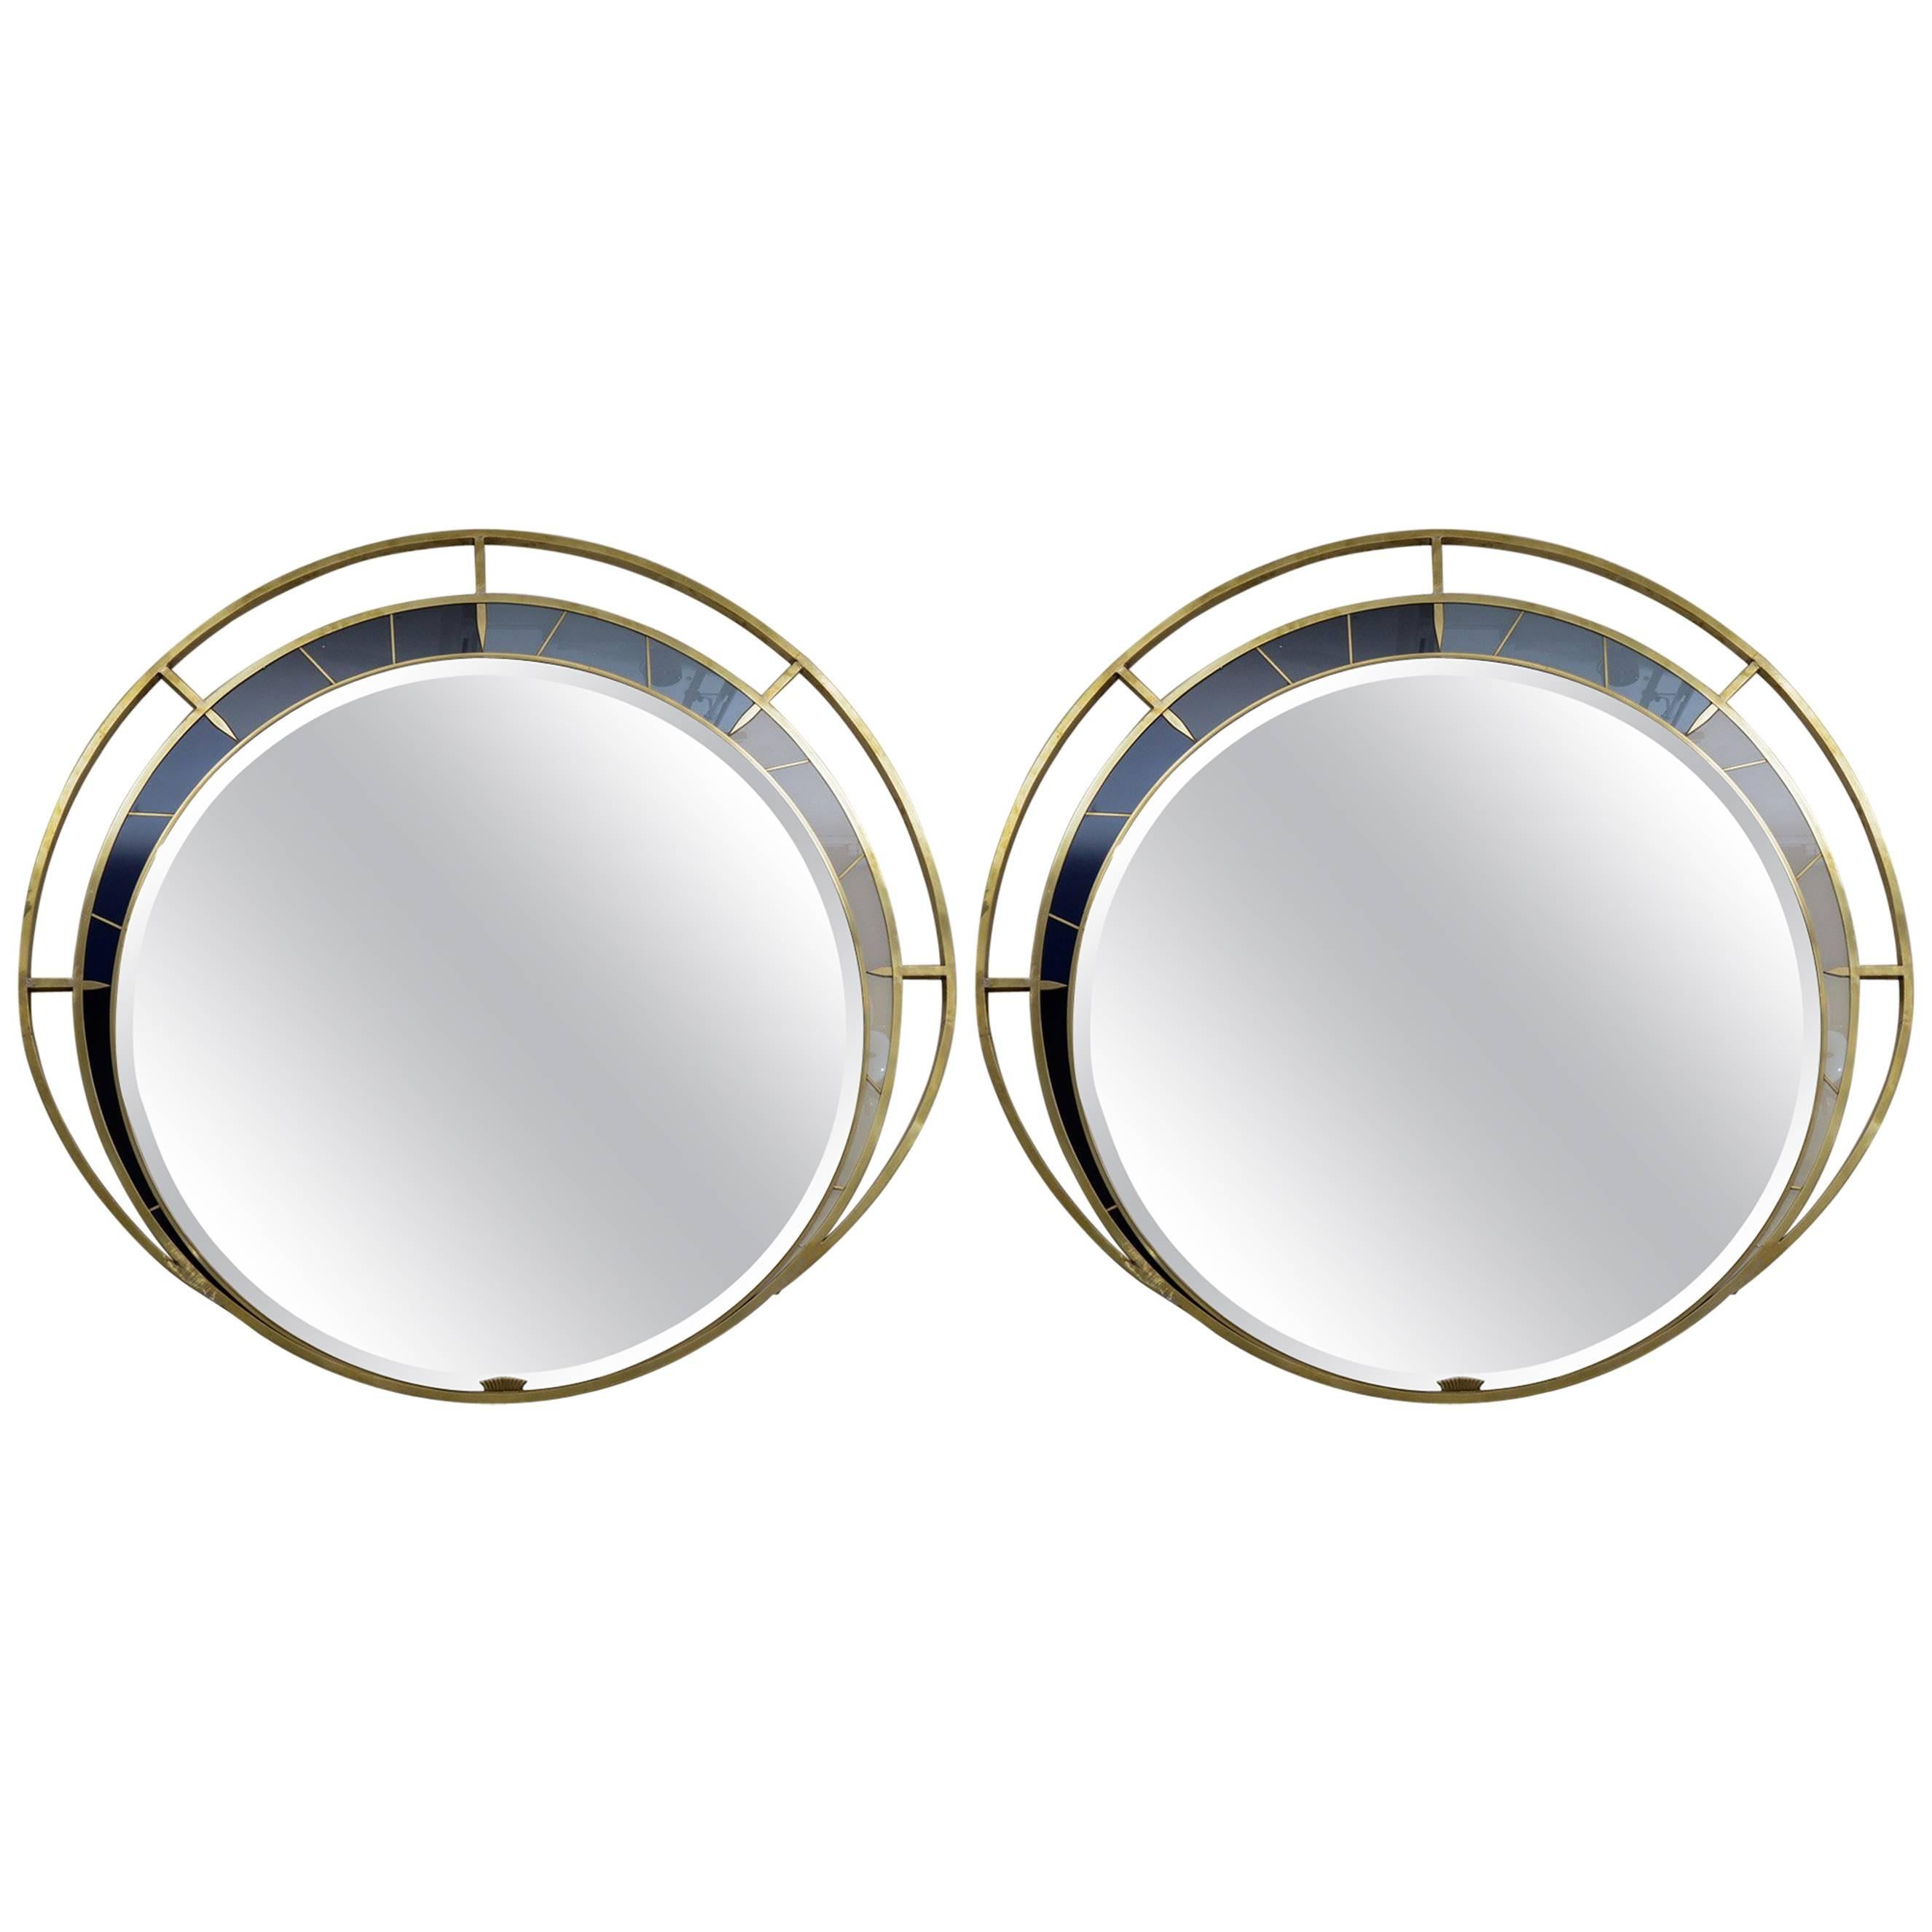 Exceptional Pair of Large Round Mirrors